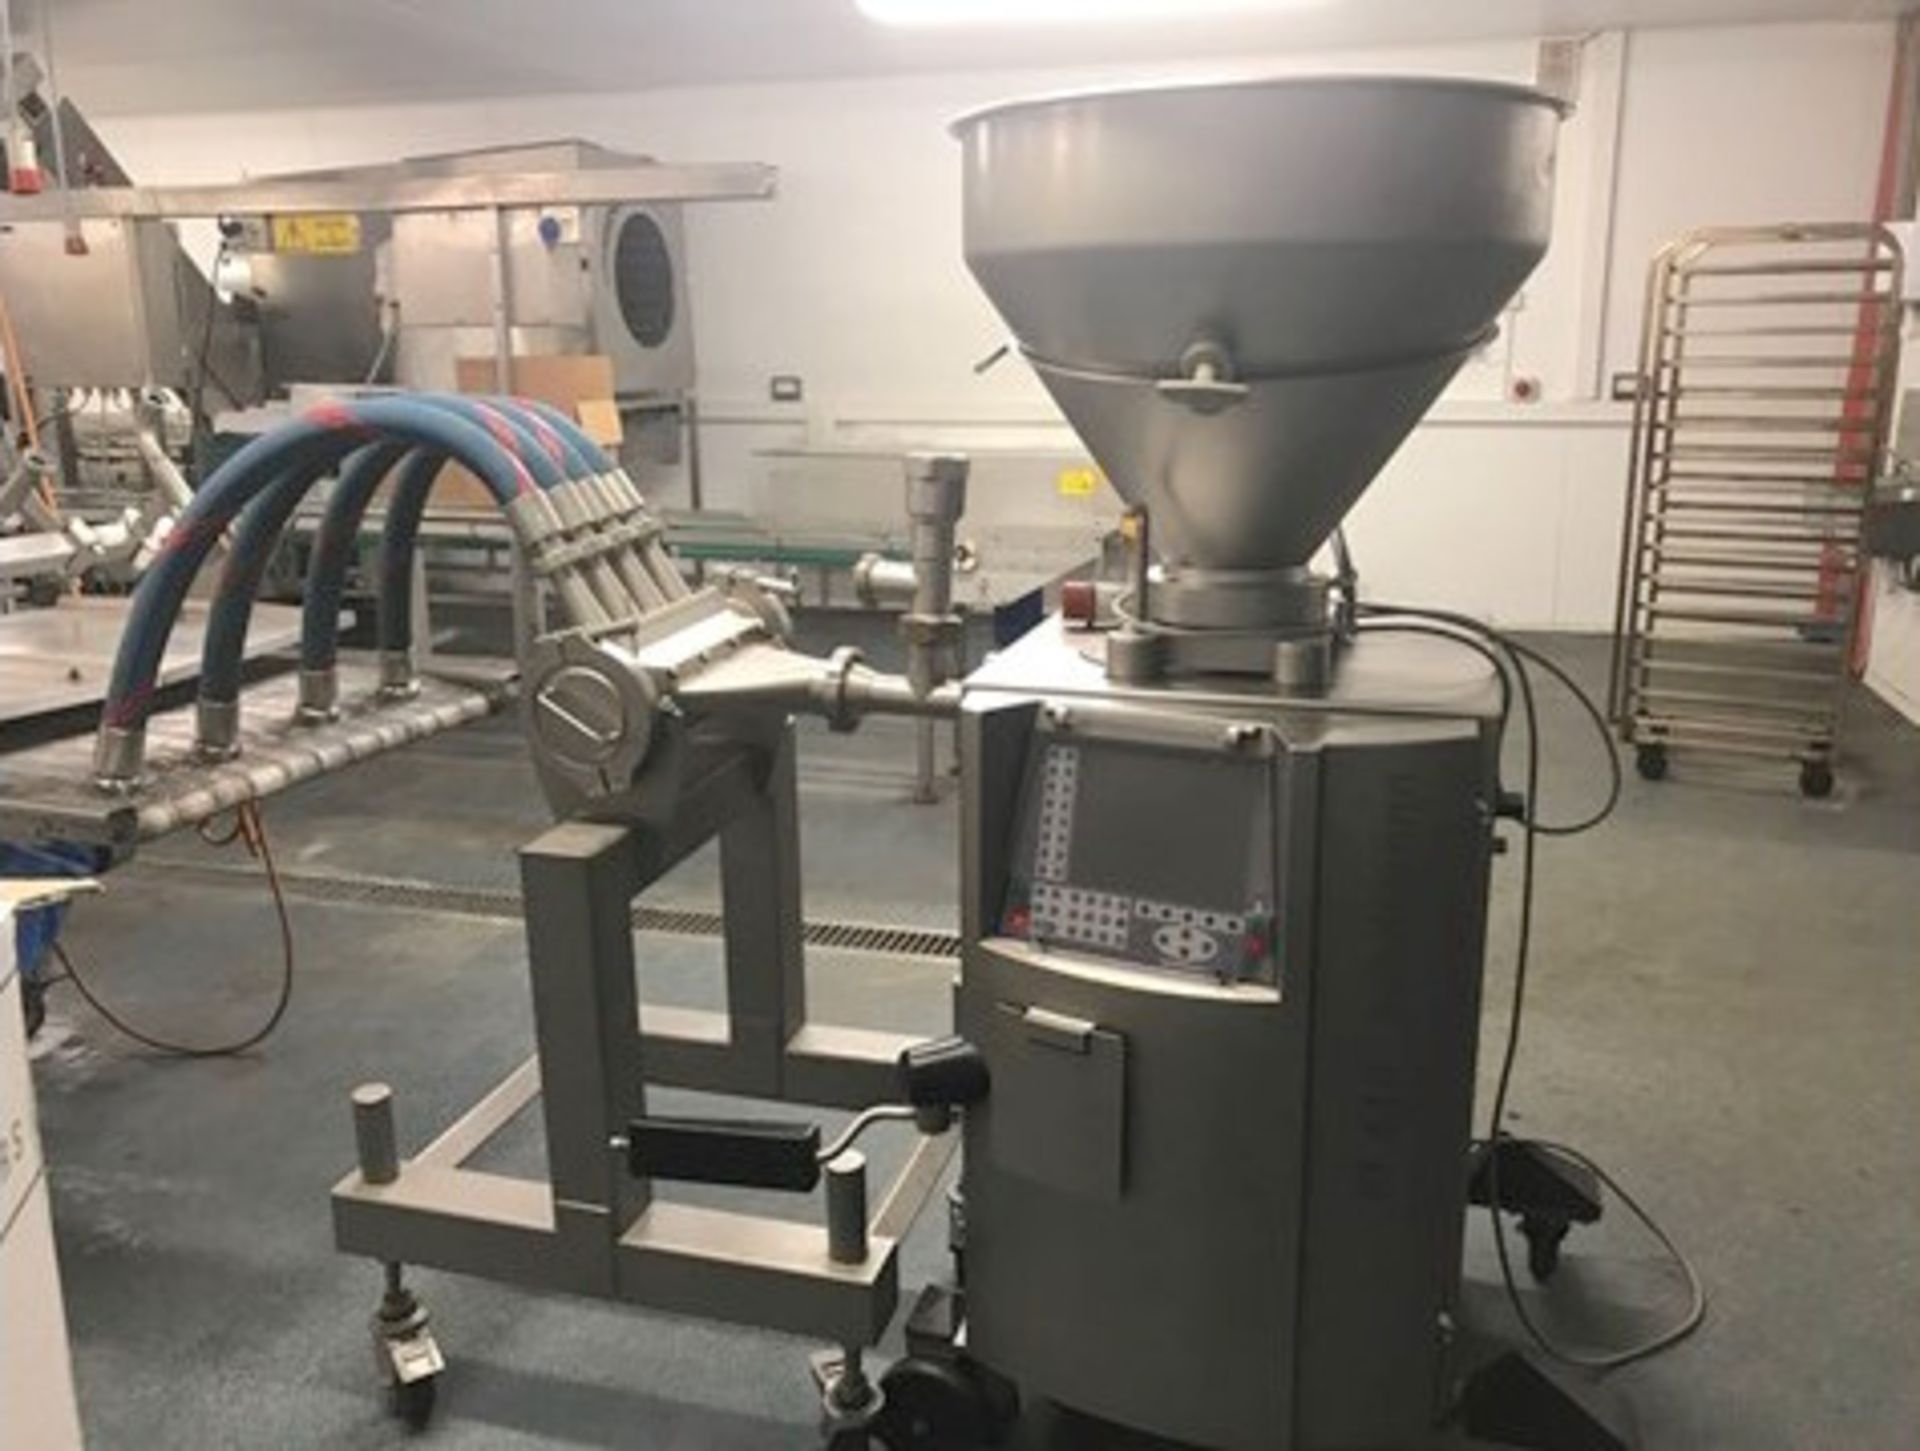 samosa 610 vacuum filler with 4 lane depositor and wire mesh conveyor.LO£150